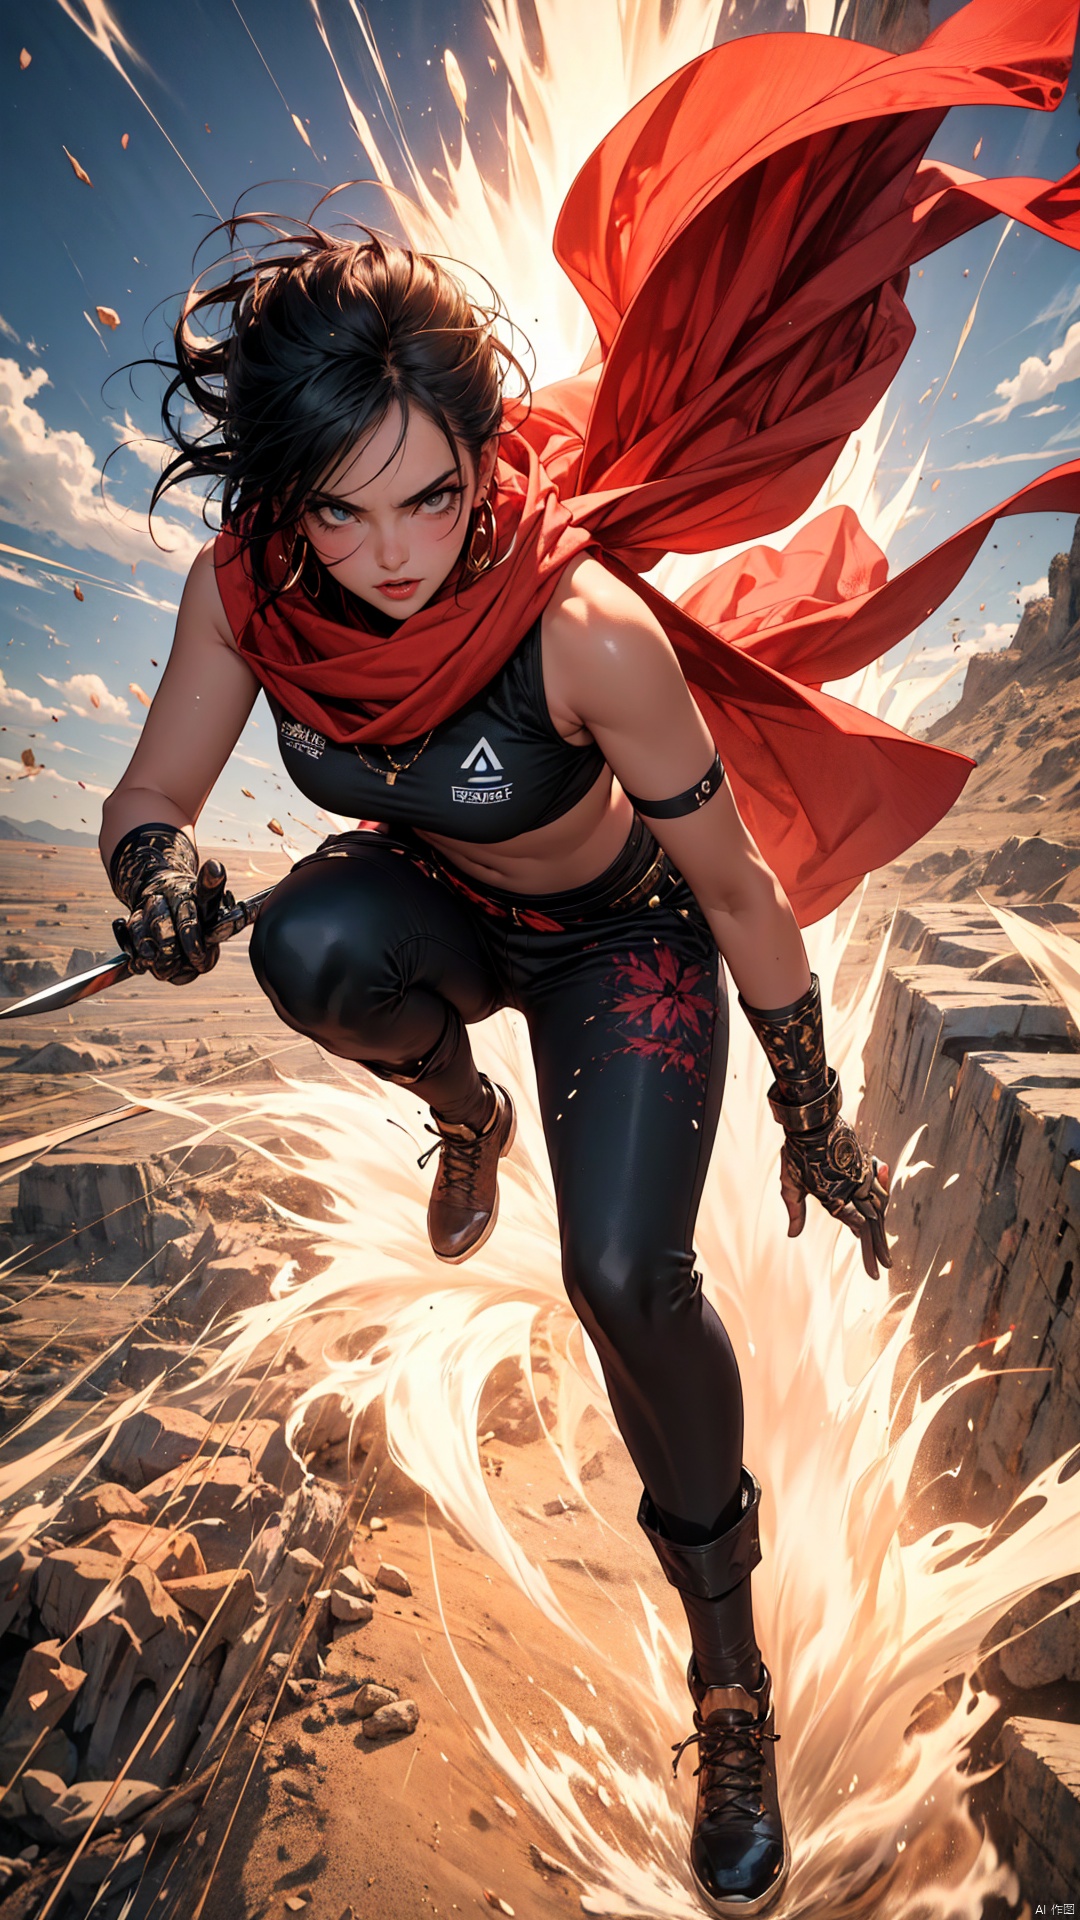 1female,  BLADEPOINT's Canna-inspired character, full body, stealthy desert warrior, form-fitting cat burglar outfit, revealing top with intricate patterns, scarves billowing in motion, multiple daggers and grappling hook, acrobatic posture, exotic Middle Eastern aesthetics, tanned skin, tousled dark hair, piercing gaze, agile movement, sand dunes or ancient ruins as backdrop, evocative of her swift and elusive nature.